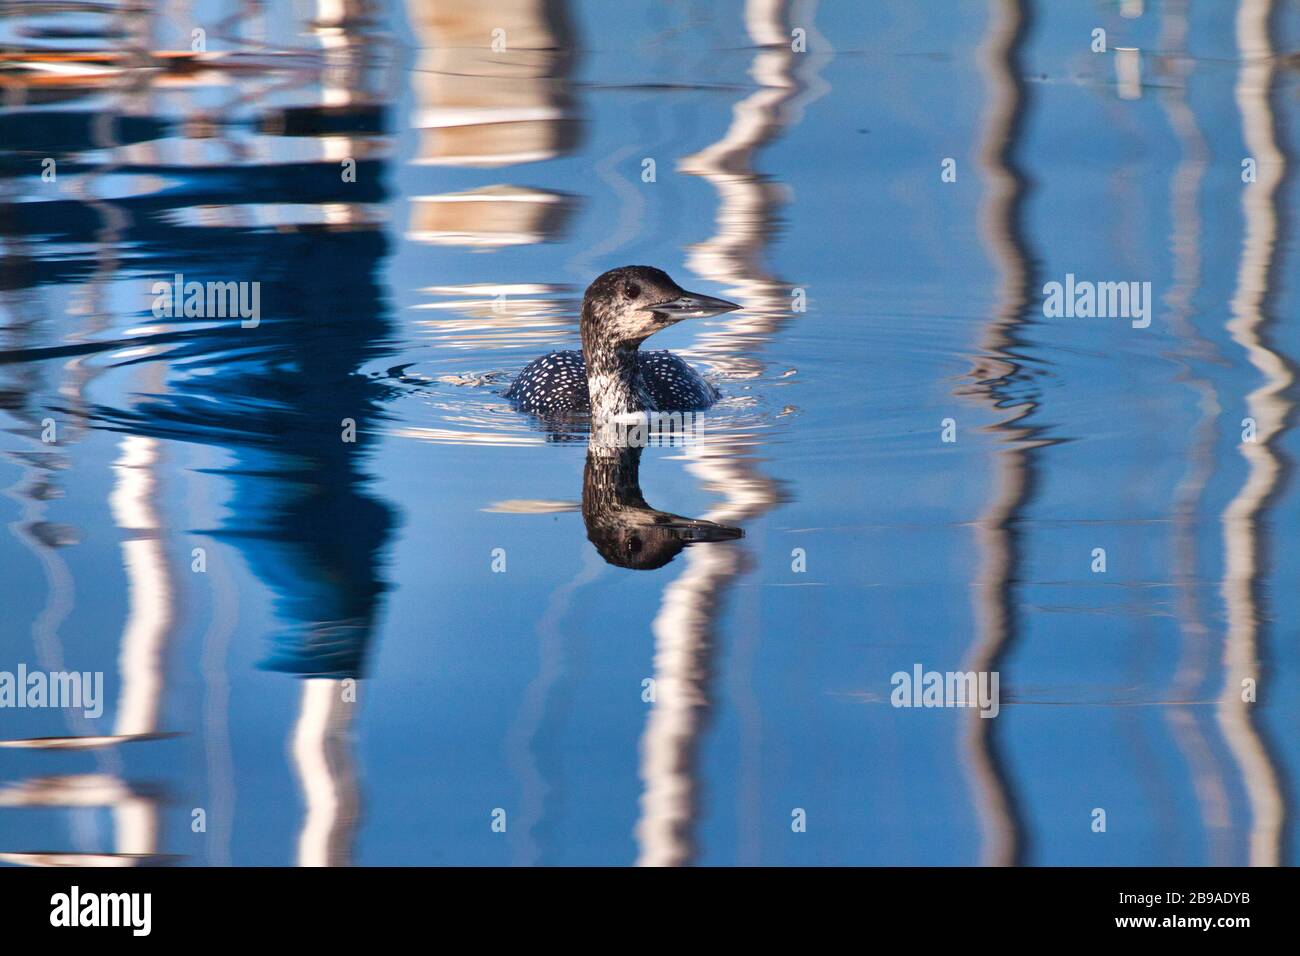 Sea duck swimming through a highly reflective ocean at a boat harbor. Stock Photo